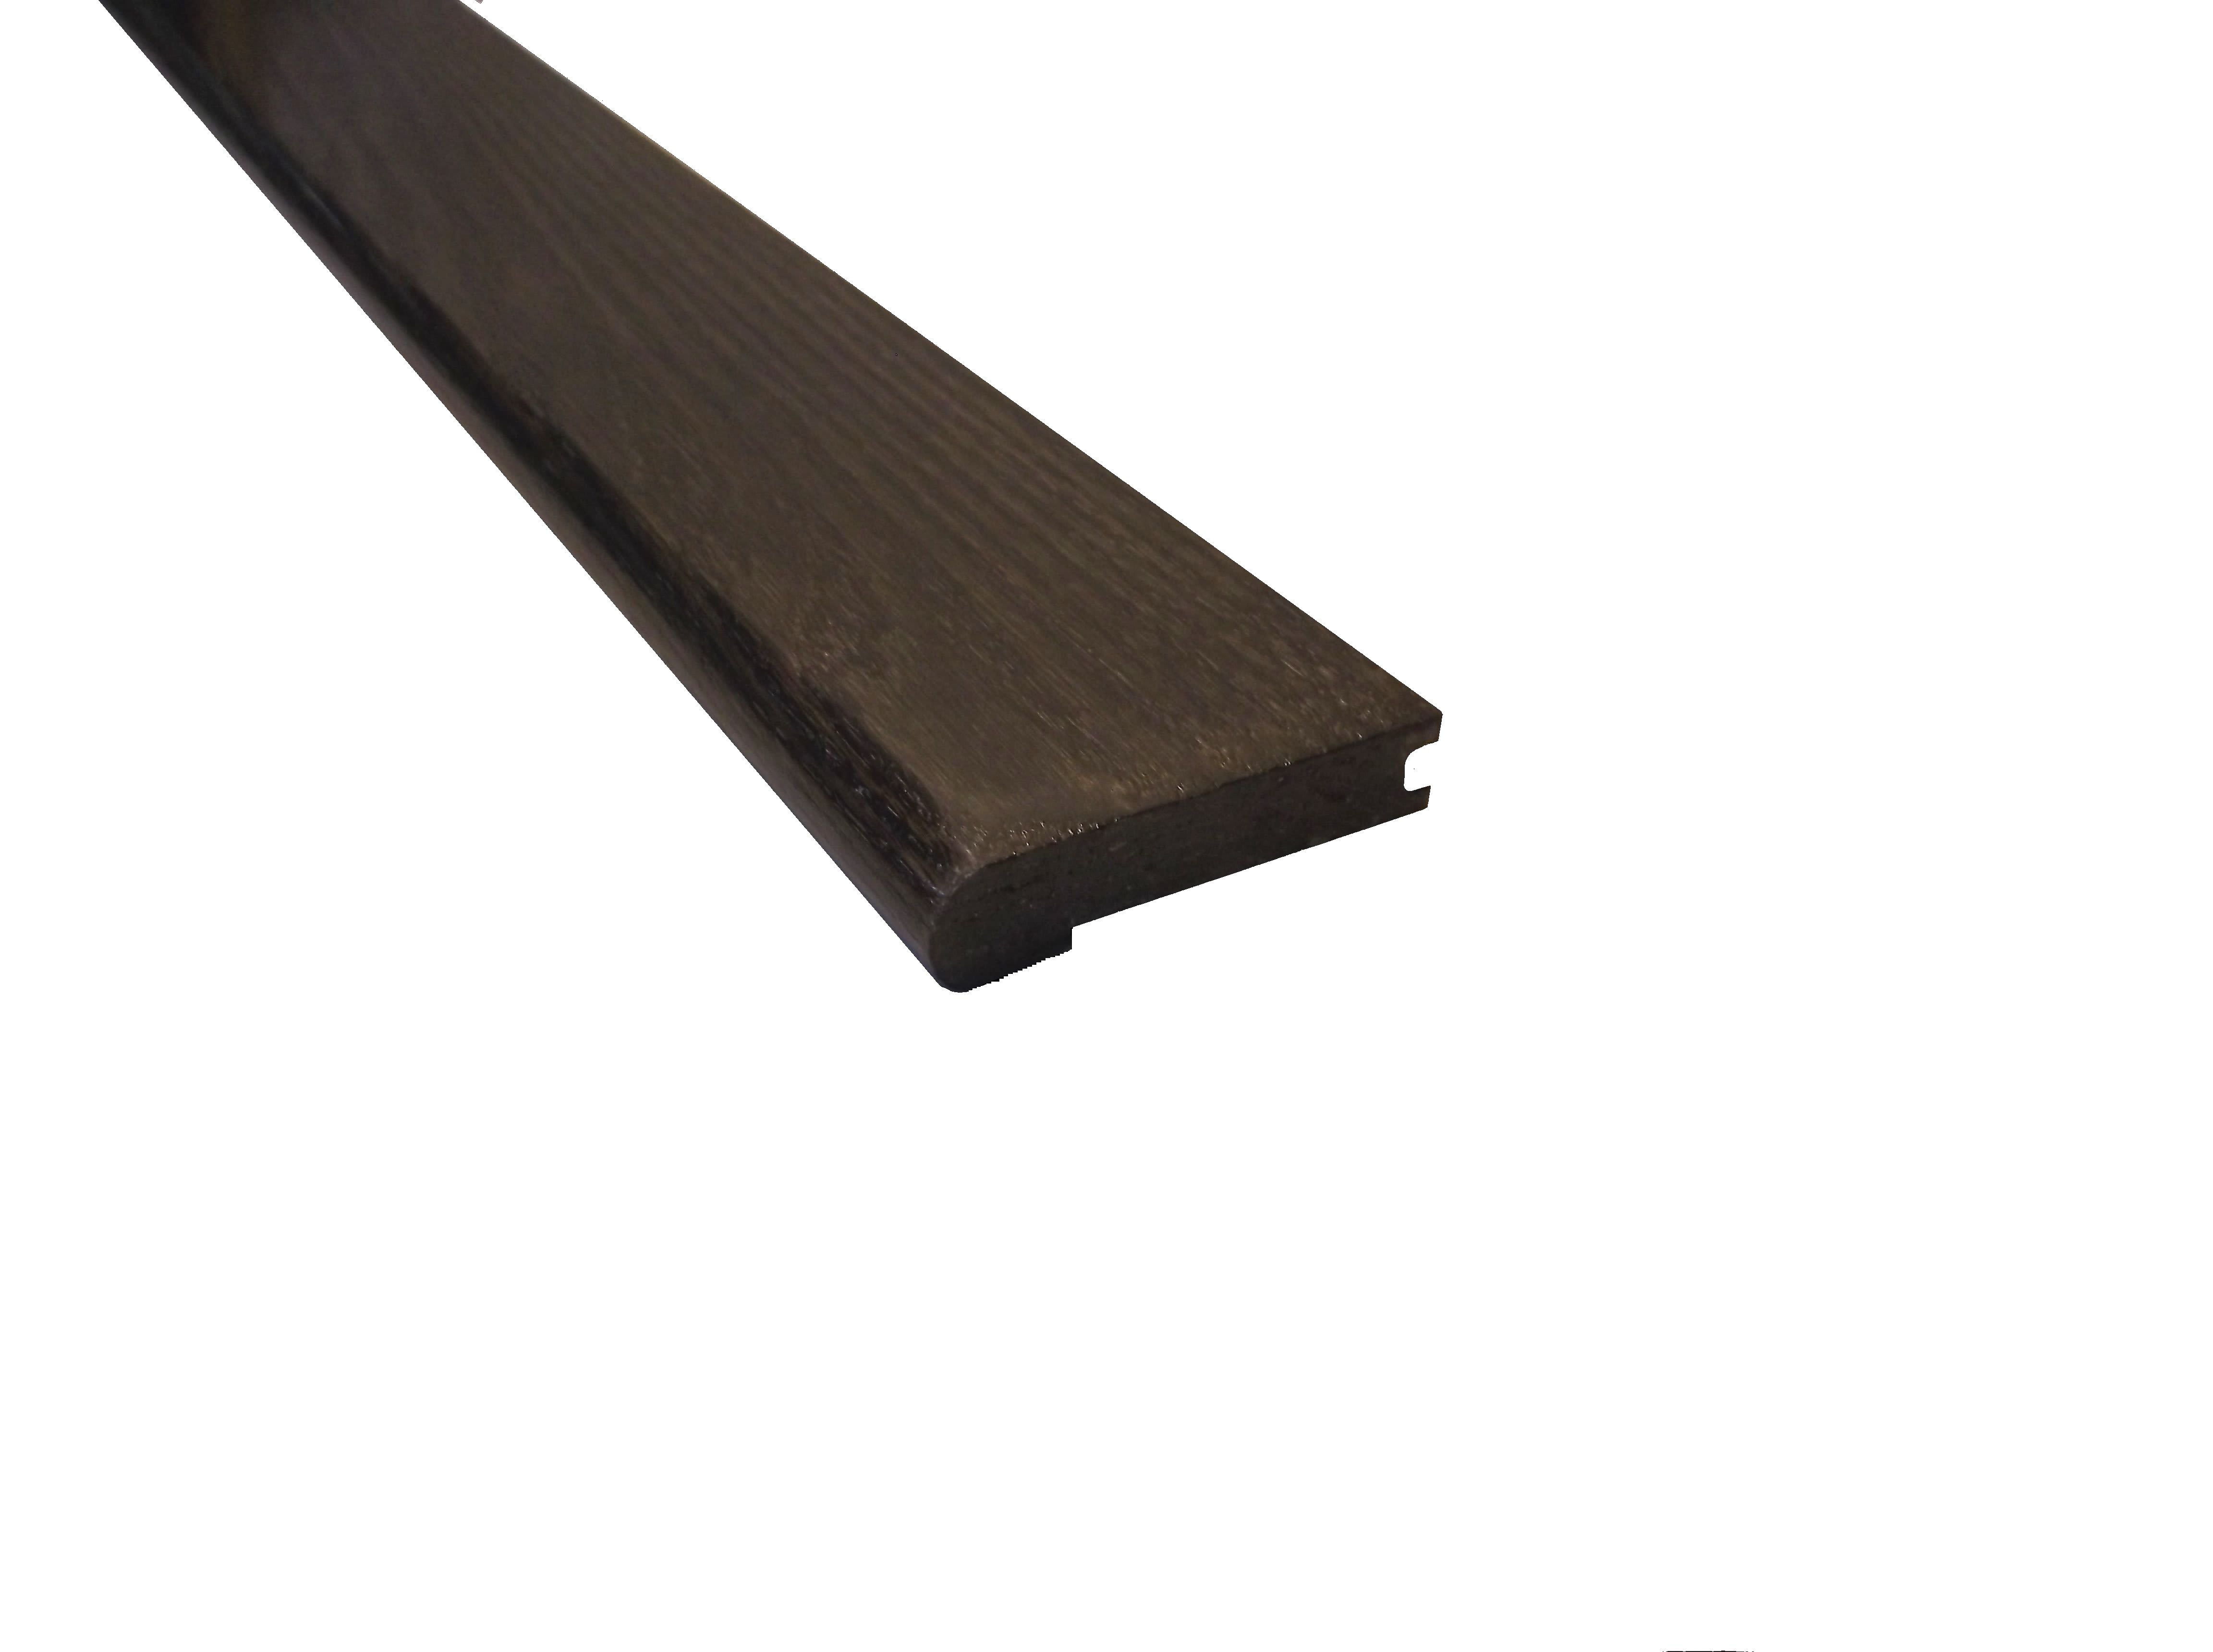 Prefinished Espresso Oak Hardwood 3/4 in thick x 3.125 in wide x 78 in Length Stair Nose